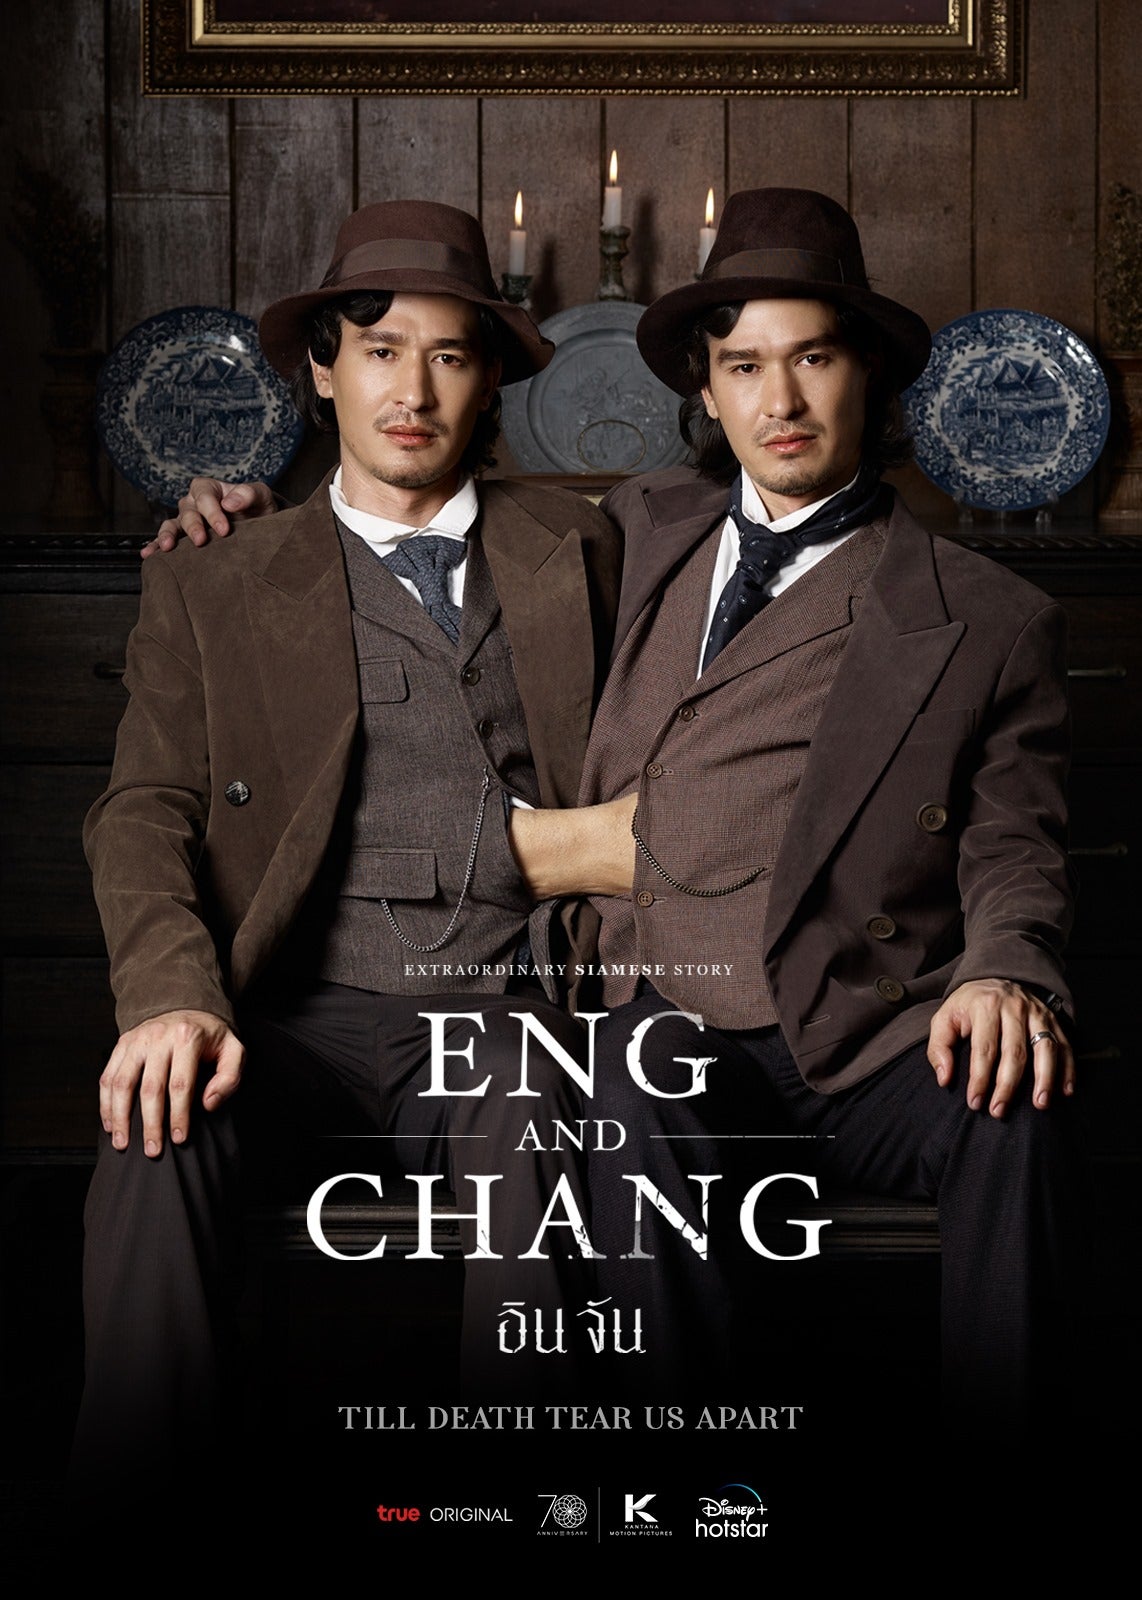 TV ratings for Extraordinary Siamese Story: Eng And Chang (อินจัน) in Corea del Sur. Disney+ TV series